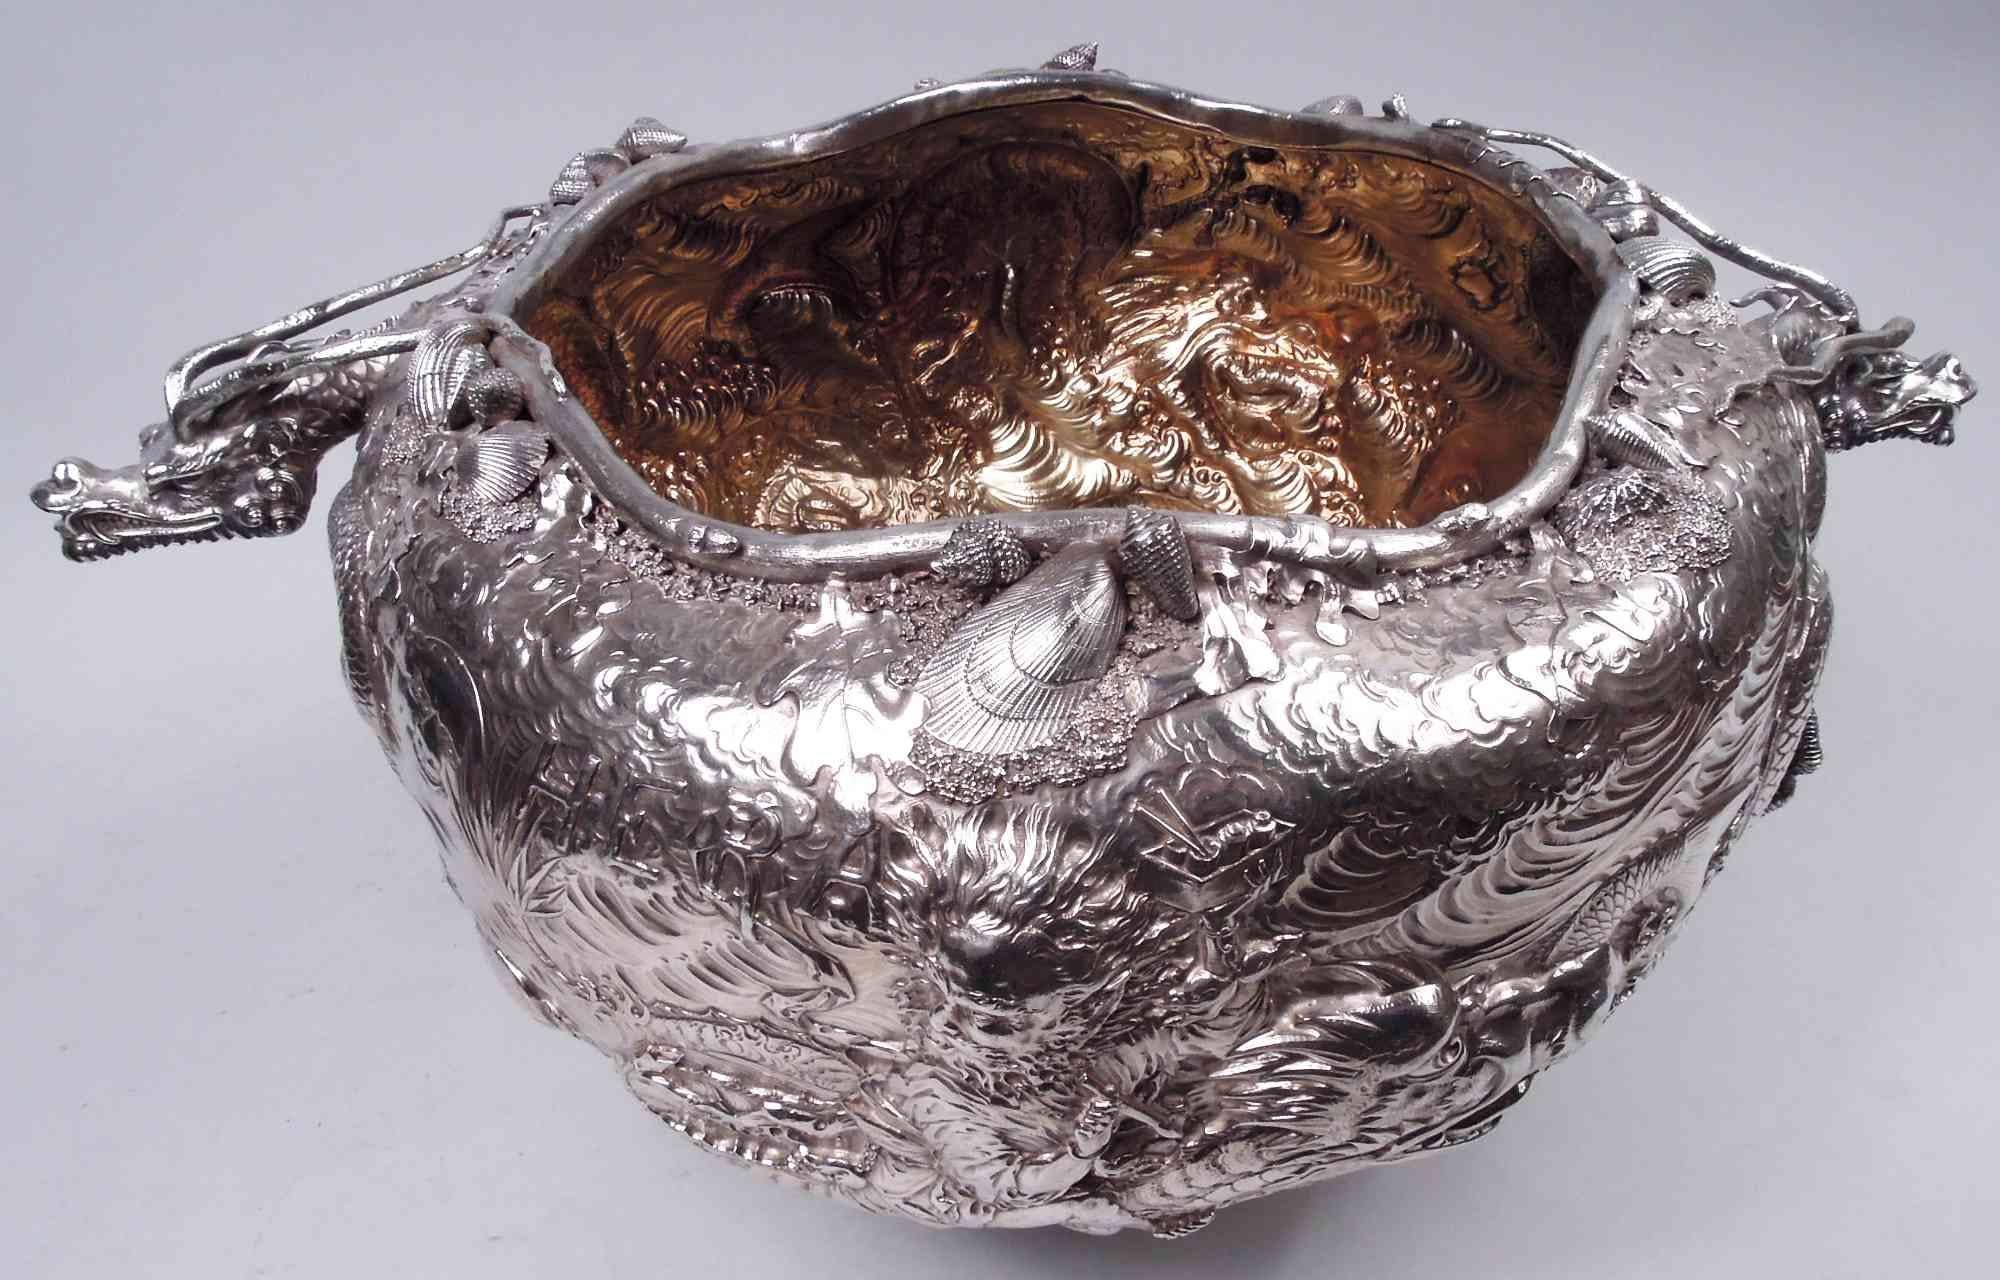 Gorgeous museum-quality Japonesque sterling silver trophy bowl. Made by Gorham in Providence in 1884. Large and round with allover ornament in relief. Horned serpents swim slack-jawed through the water. Talons and heads 